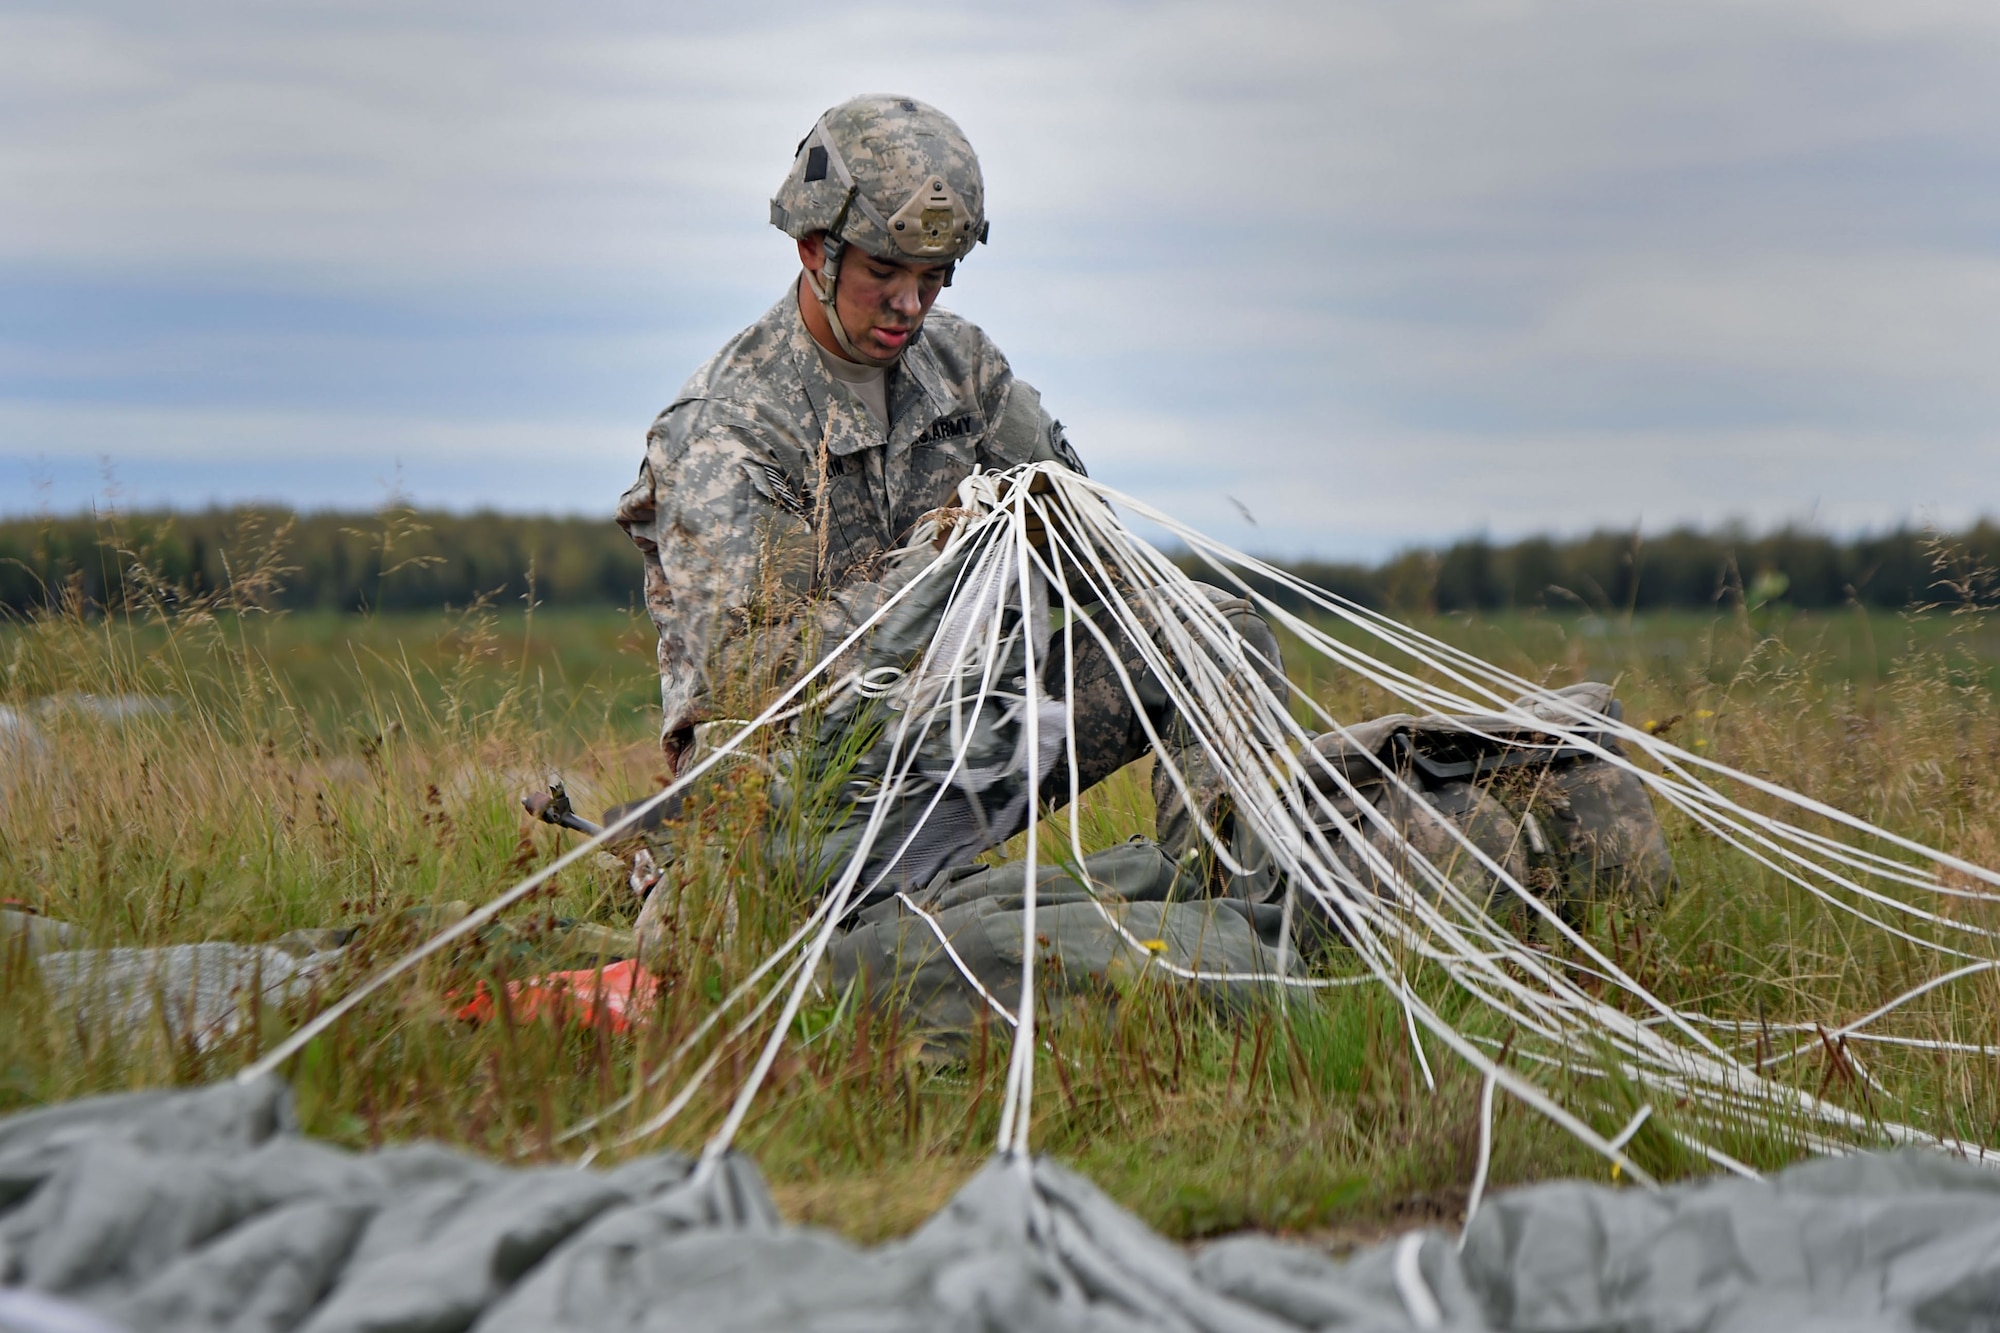 Pfc. Daniel Keplin, a native of Spokane, Washington, assigned to the1st Battalion, 501st Parachute Infantry Regiment, 4th Infantry Brigade Combat Team (Airborne), 25th Infantry Division, U.S. Army Alaska, gathers his gear during a joint forcible entry exercise at Malemute Drop Zone on Joint Base Elmendorf-Richardson, Alaska, Aug. 23, 2016, as part of Exercise Spartan Agoge. Spartan Agoge is a brigade-level field training exercise that began Aug. 15, and focuses on an array of combat-related tasks from squad live-fire exercises to helicopter air insertion and airborne assault training. (U.S. Air Force photo by Airman 1st Class Valerie Monroy)